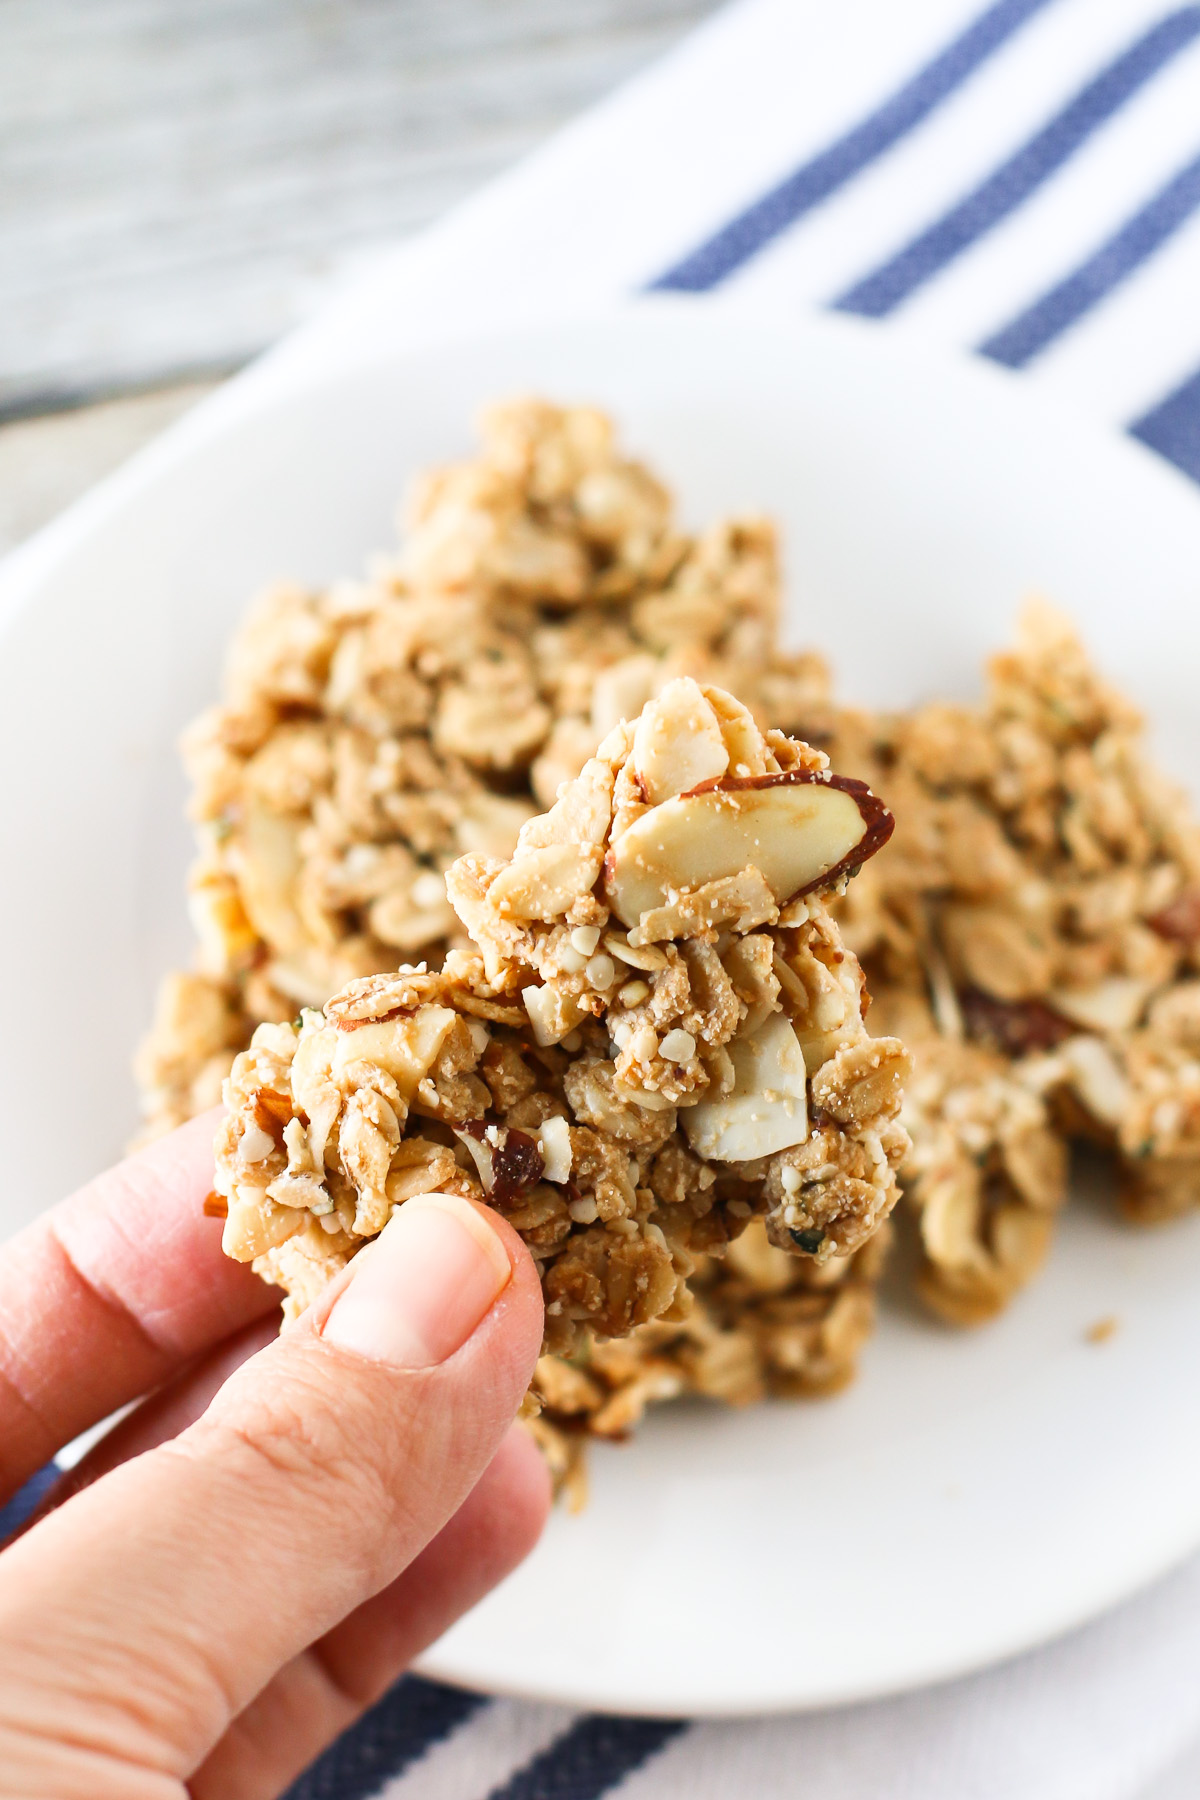 Gluten Free Vegan Maple Almond Granola Clusters. Check out those crispy, crunchy clusters of maple-sweetened granola!